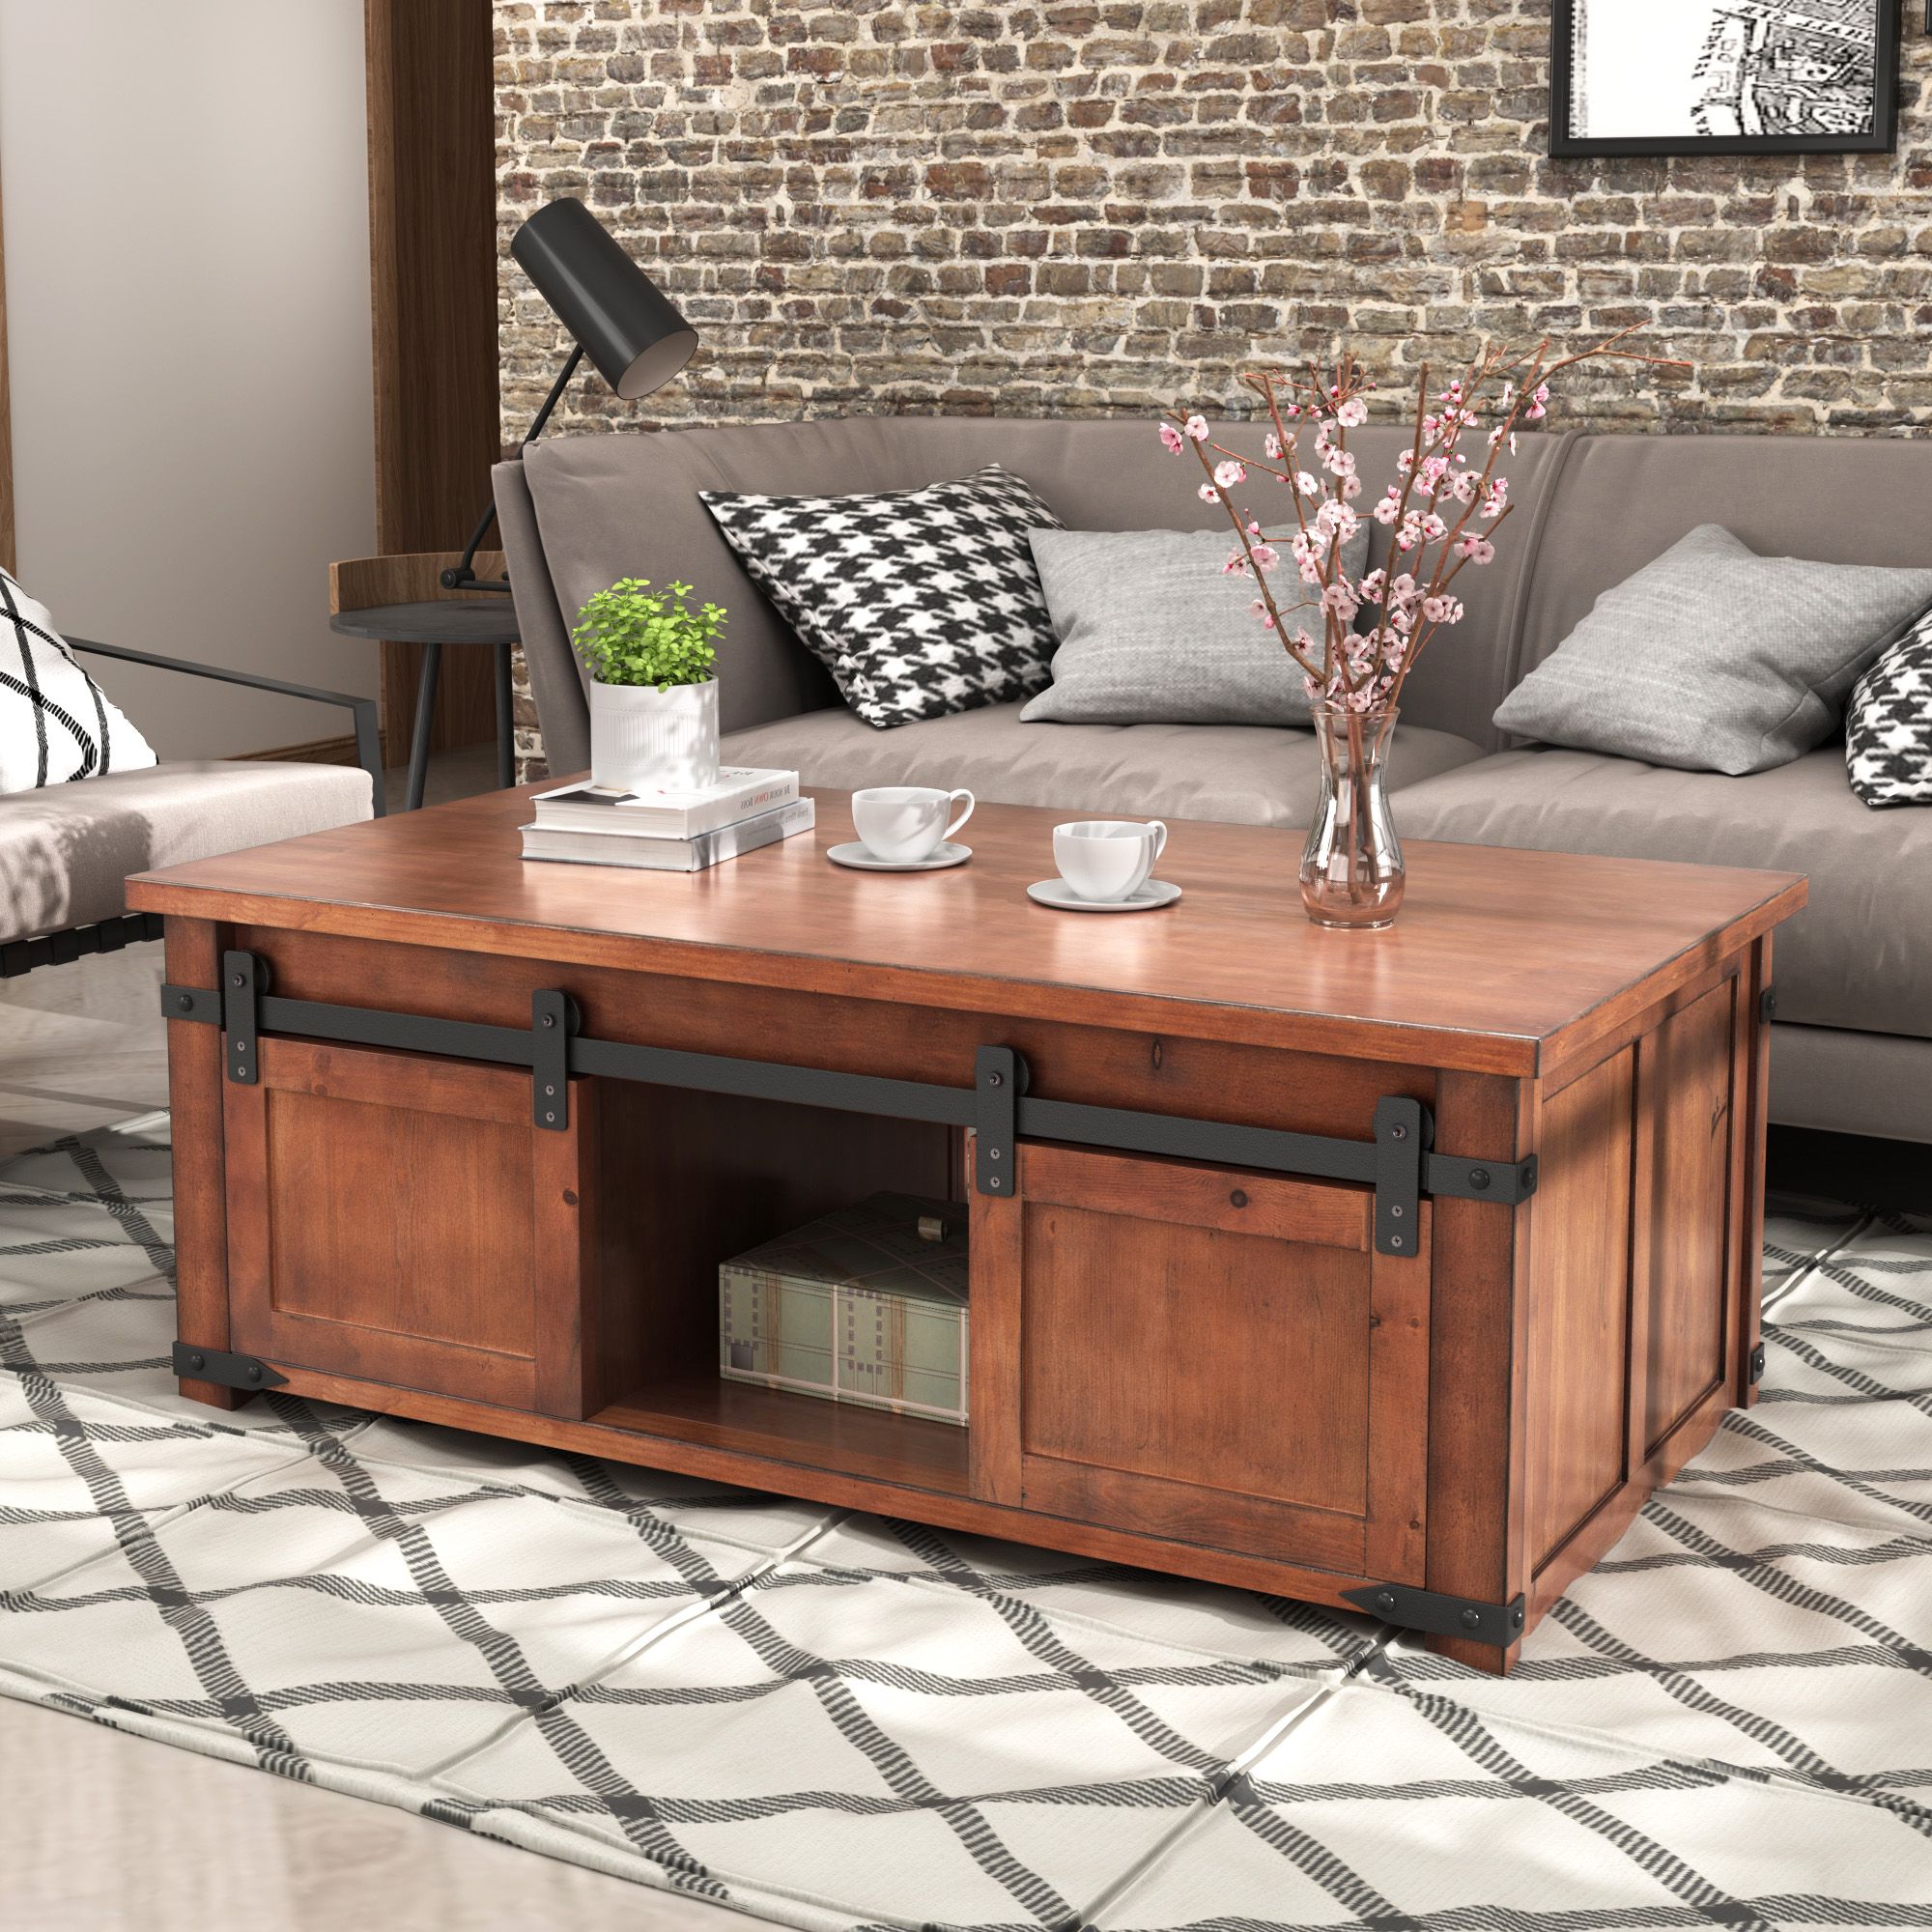 Farmhouse Coffee Table, Coffee Table With Storage Shelf With Regard To Widely Used Black Wood Storage Coffee Tables (Gallery 6 of 20)